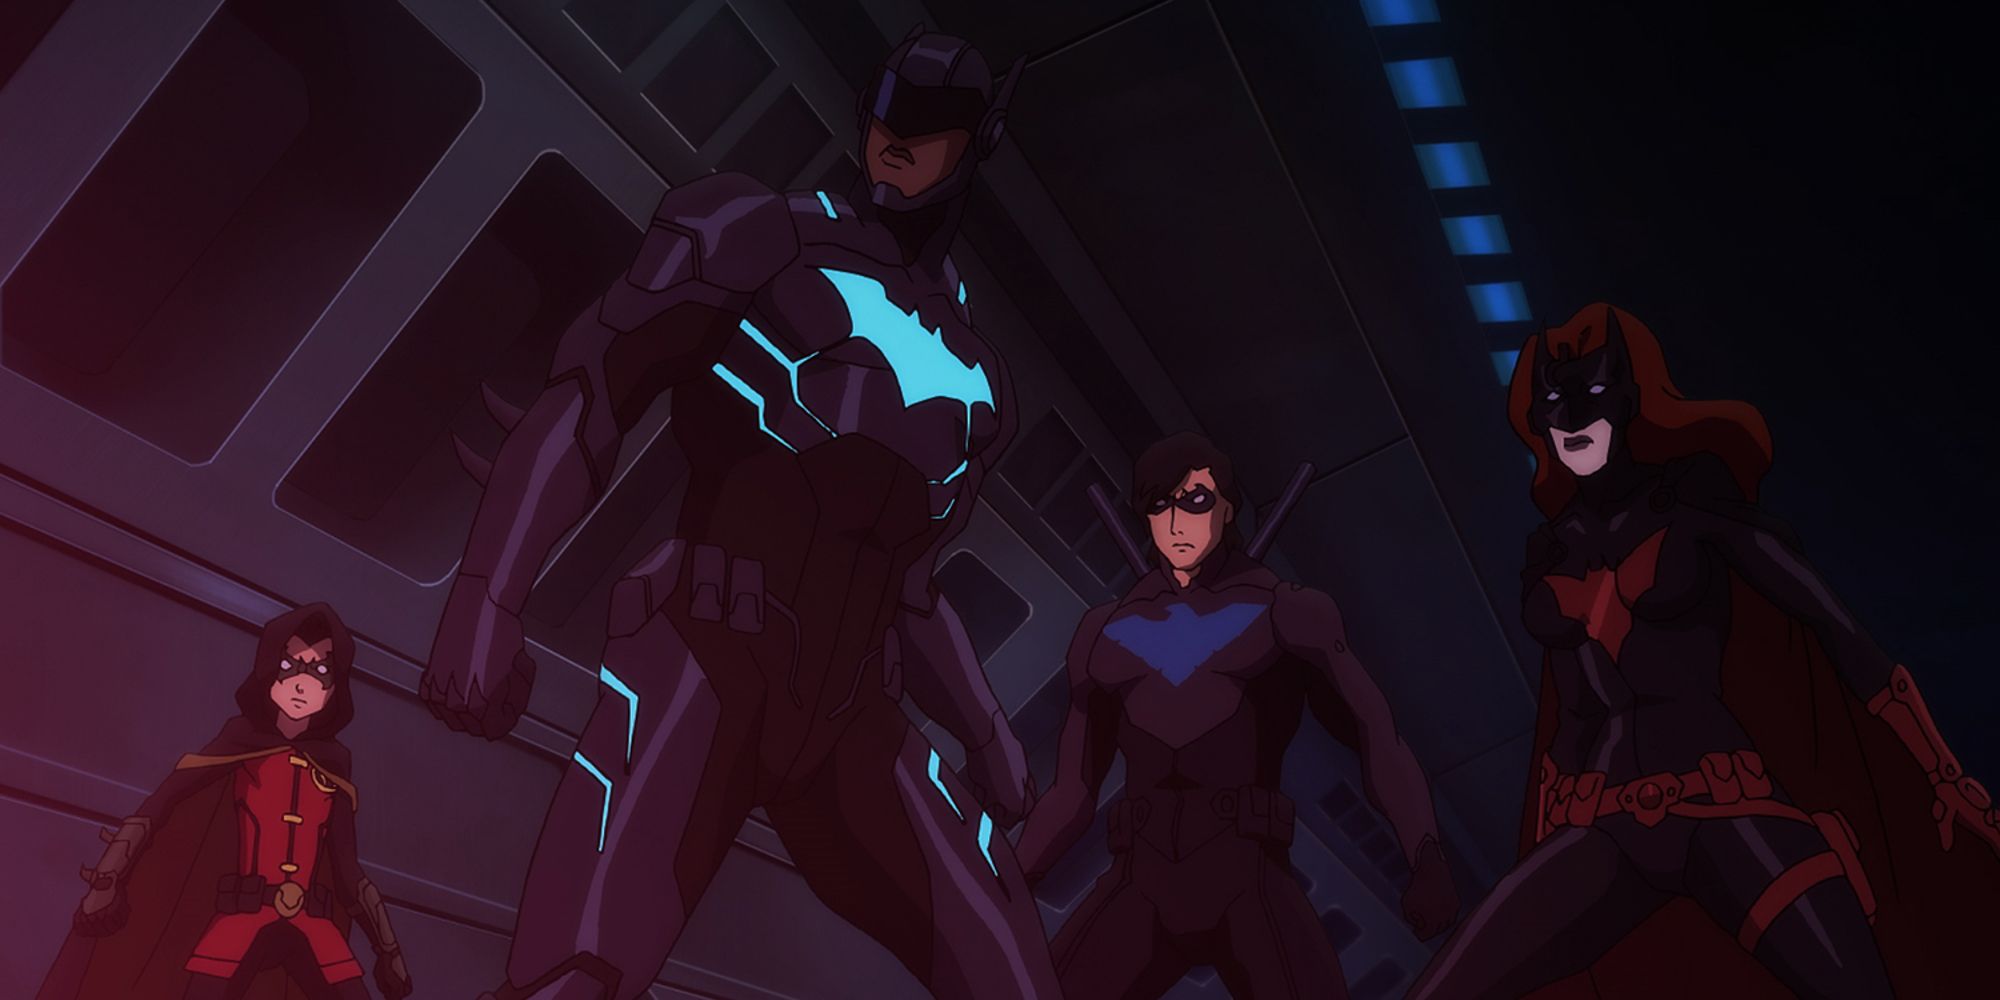 Damien Wayne, Batwing, Nightwing, and Batwoman assembled as the Bat-Family in Batman Bad Blood